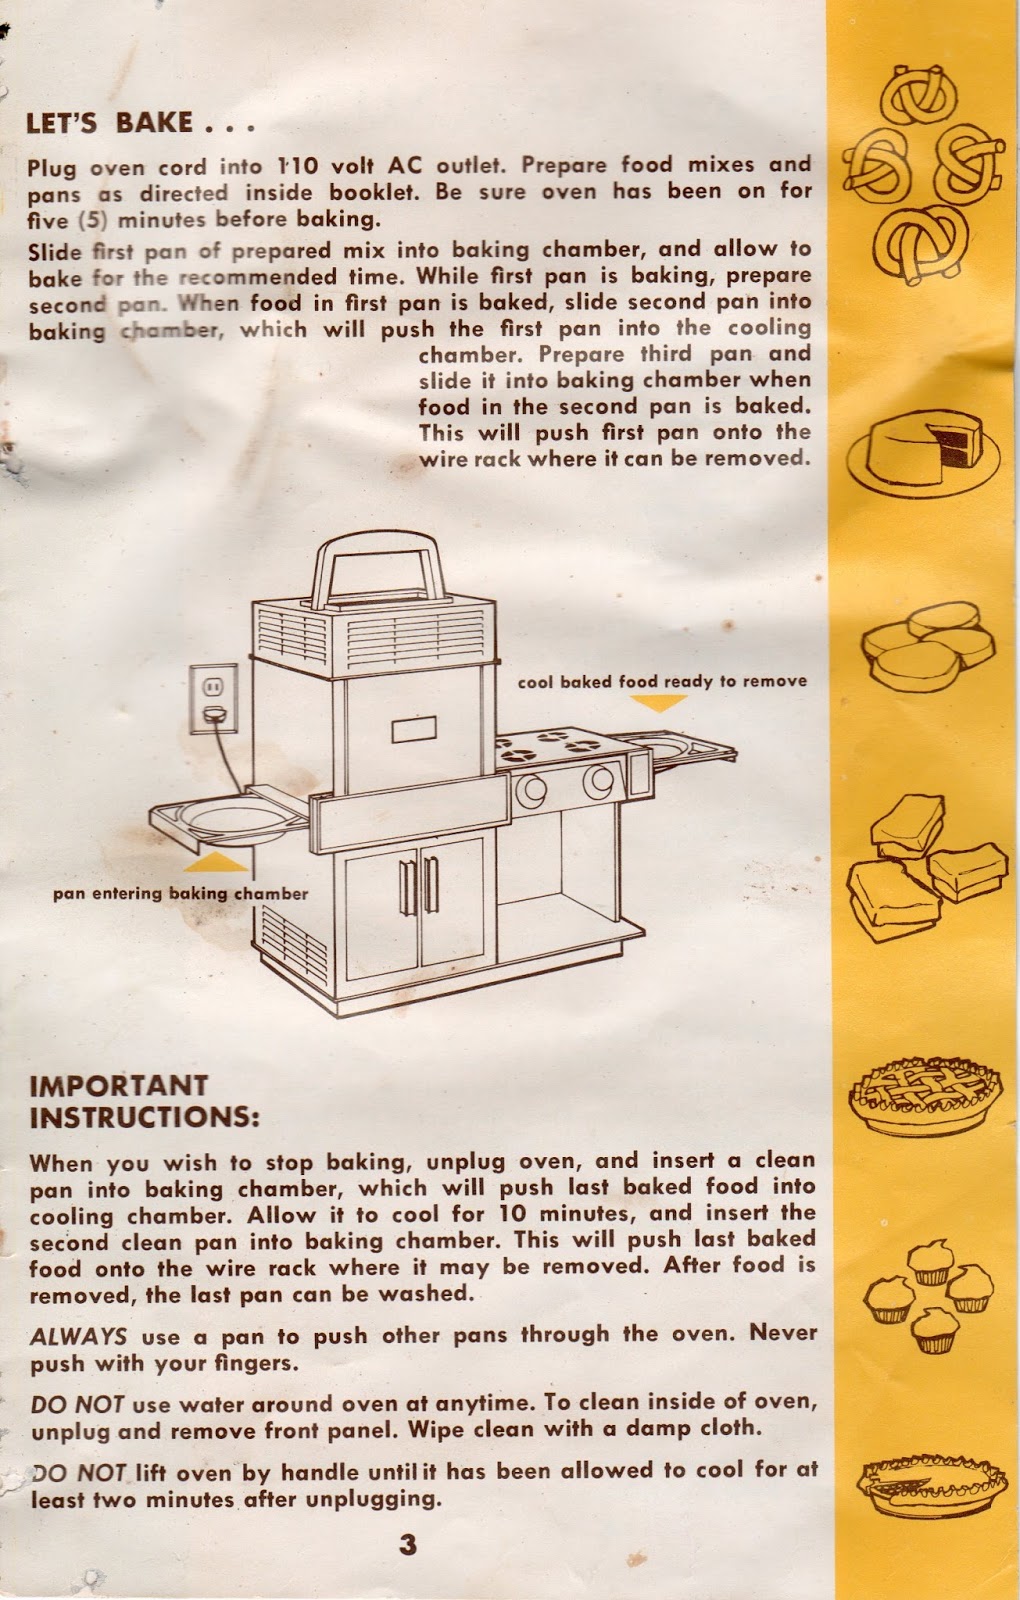 A History of the Easy-Bake Oven